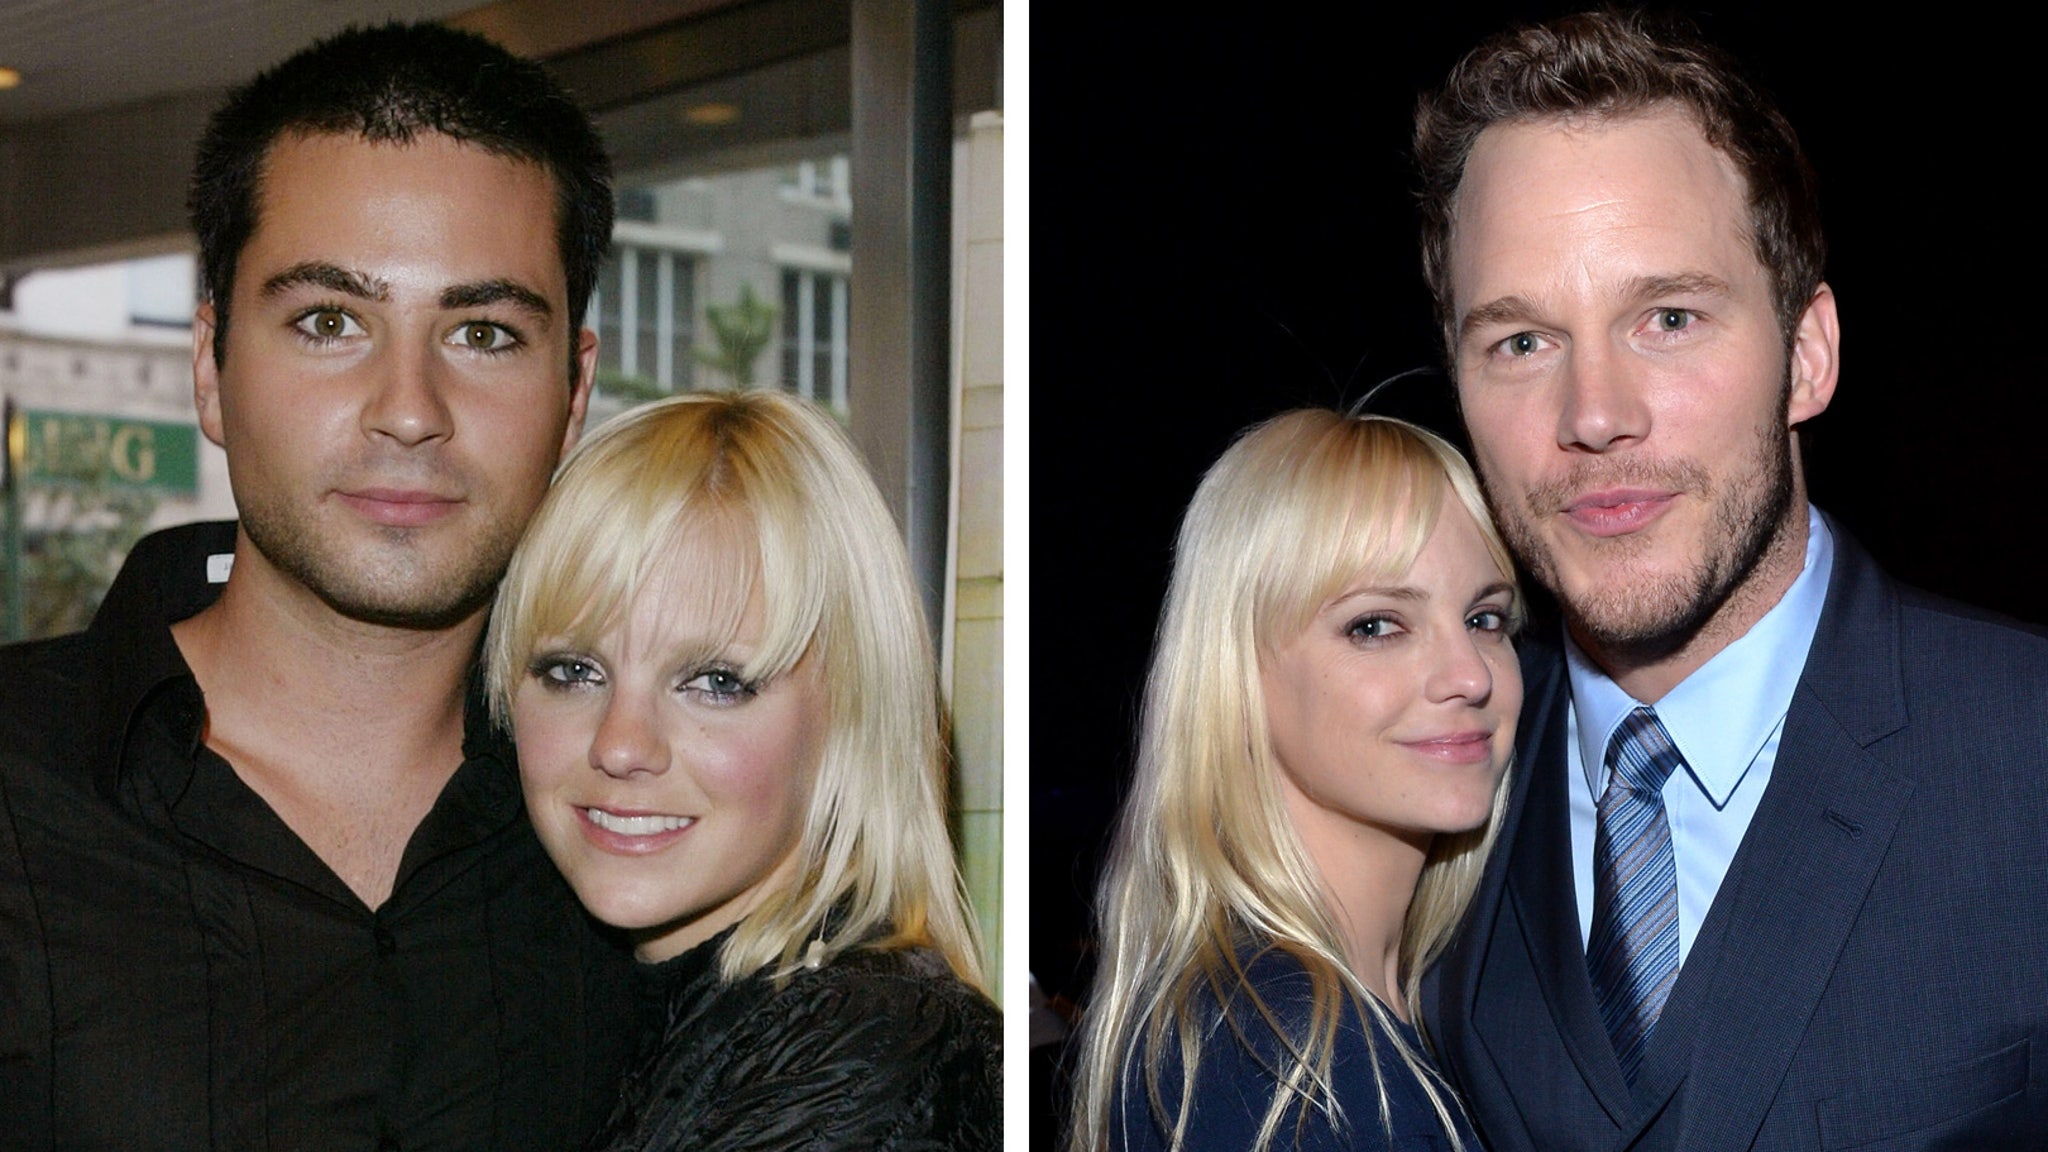 Anna Faris admits that ‘competitiveness’ has been an issue in both of her marriages in the past